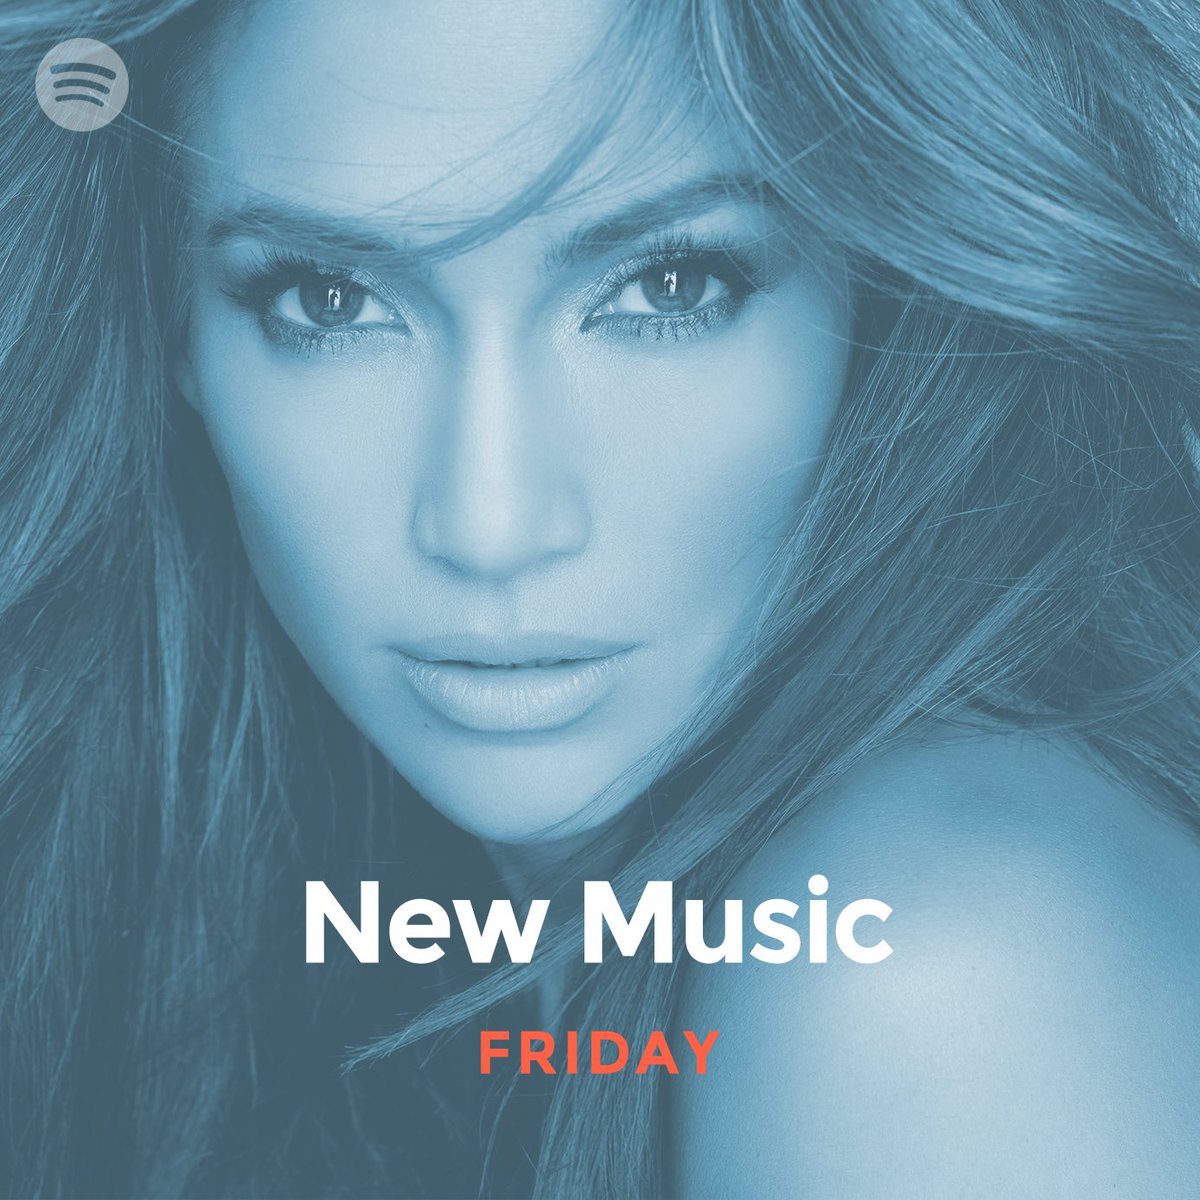 Hear my new song #Us on Spotify’s New Music Friday playlist!  
https://t.co/5oZBaTiXuW https://t.co/eiuYt6mNmI